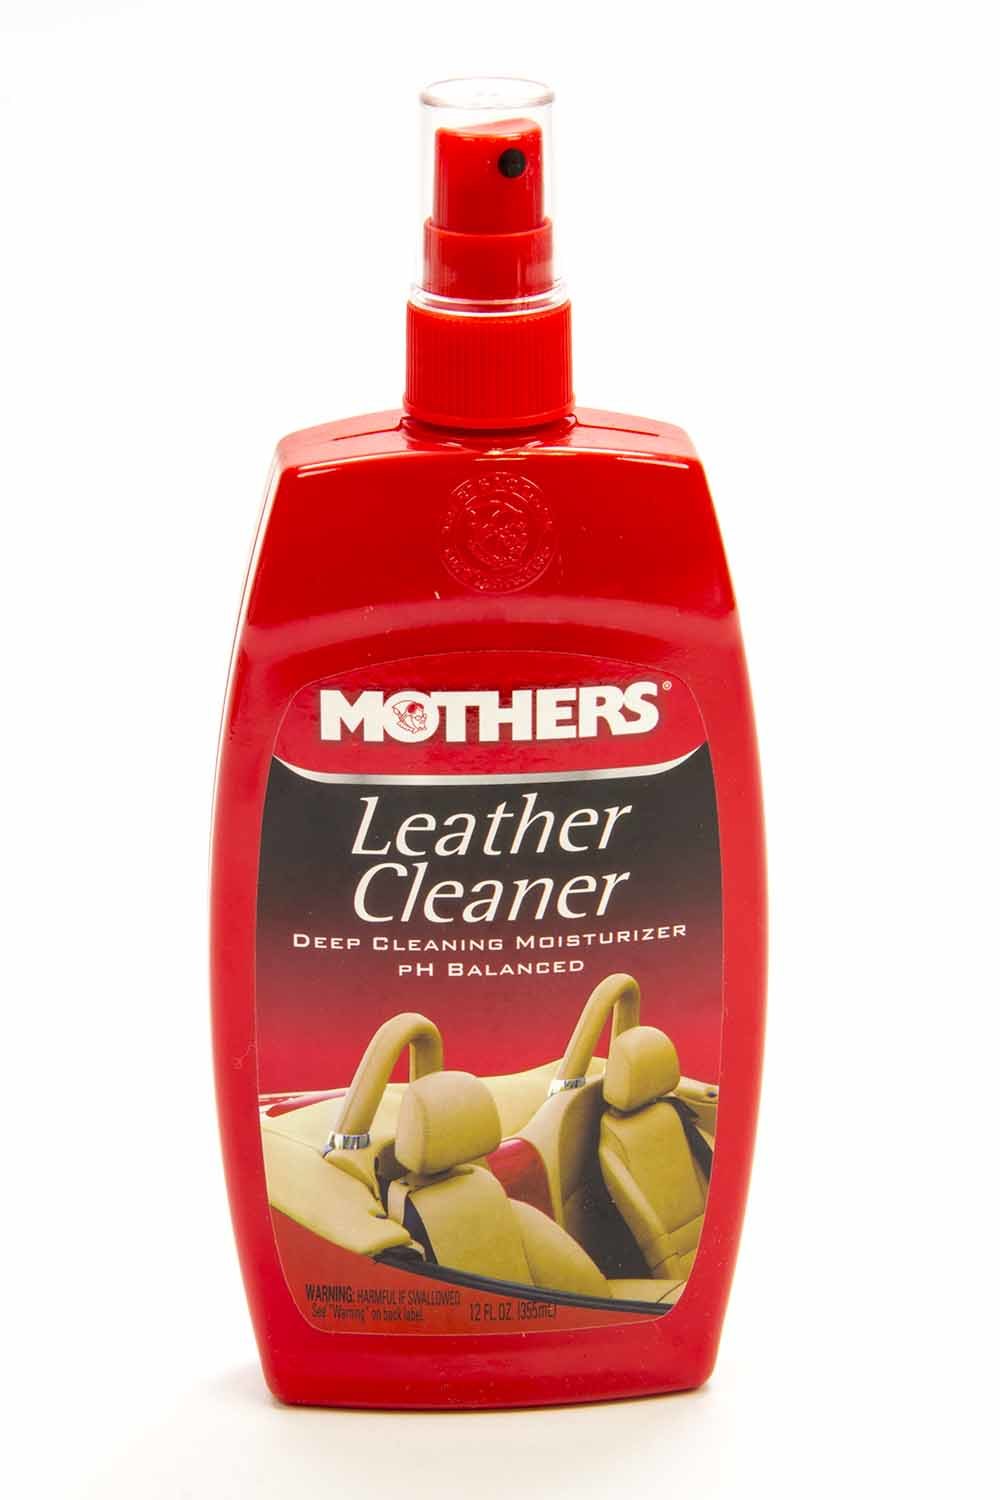 MOTHERS Leather Cleaner, 12 oz Bottle, Each